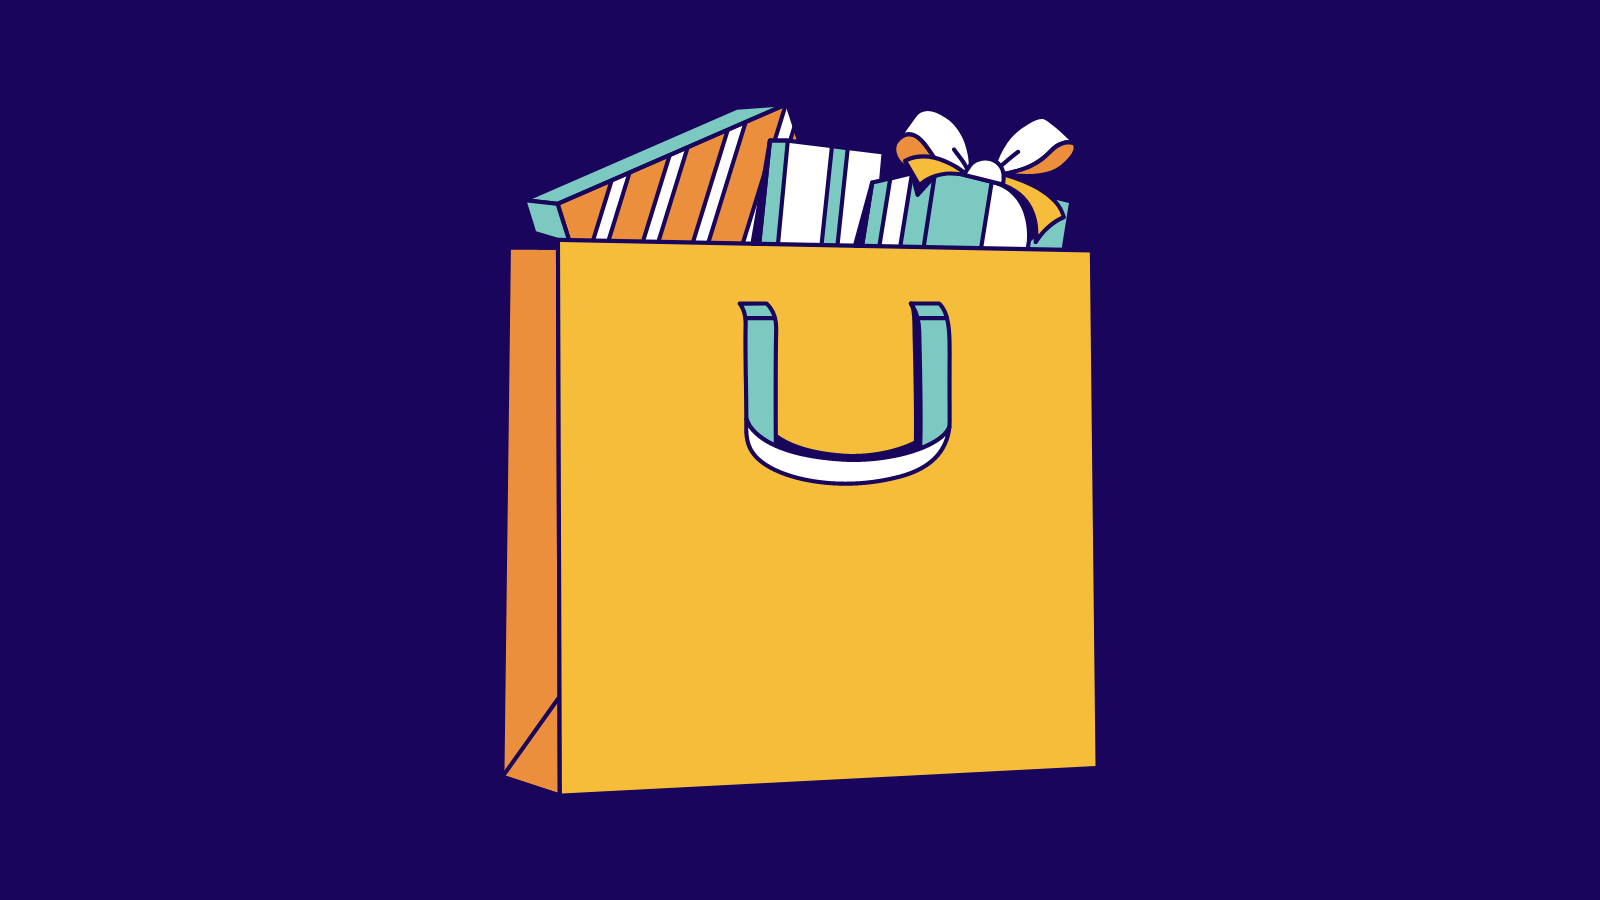 An illustration of a shopping bag